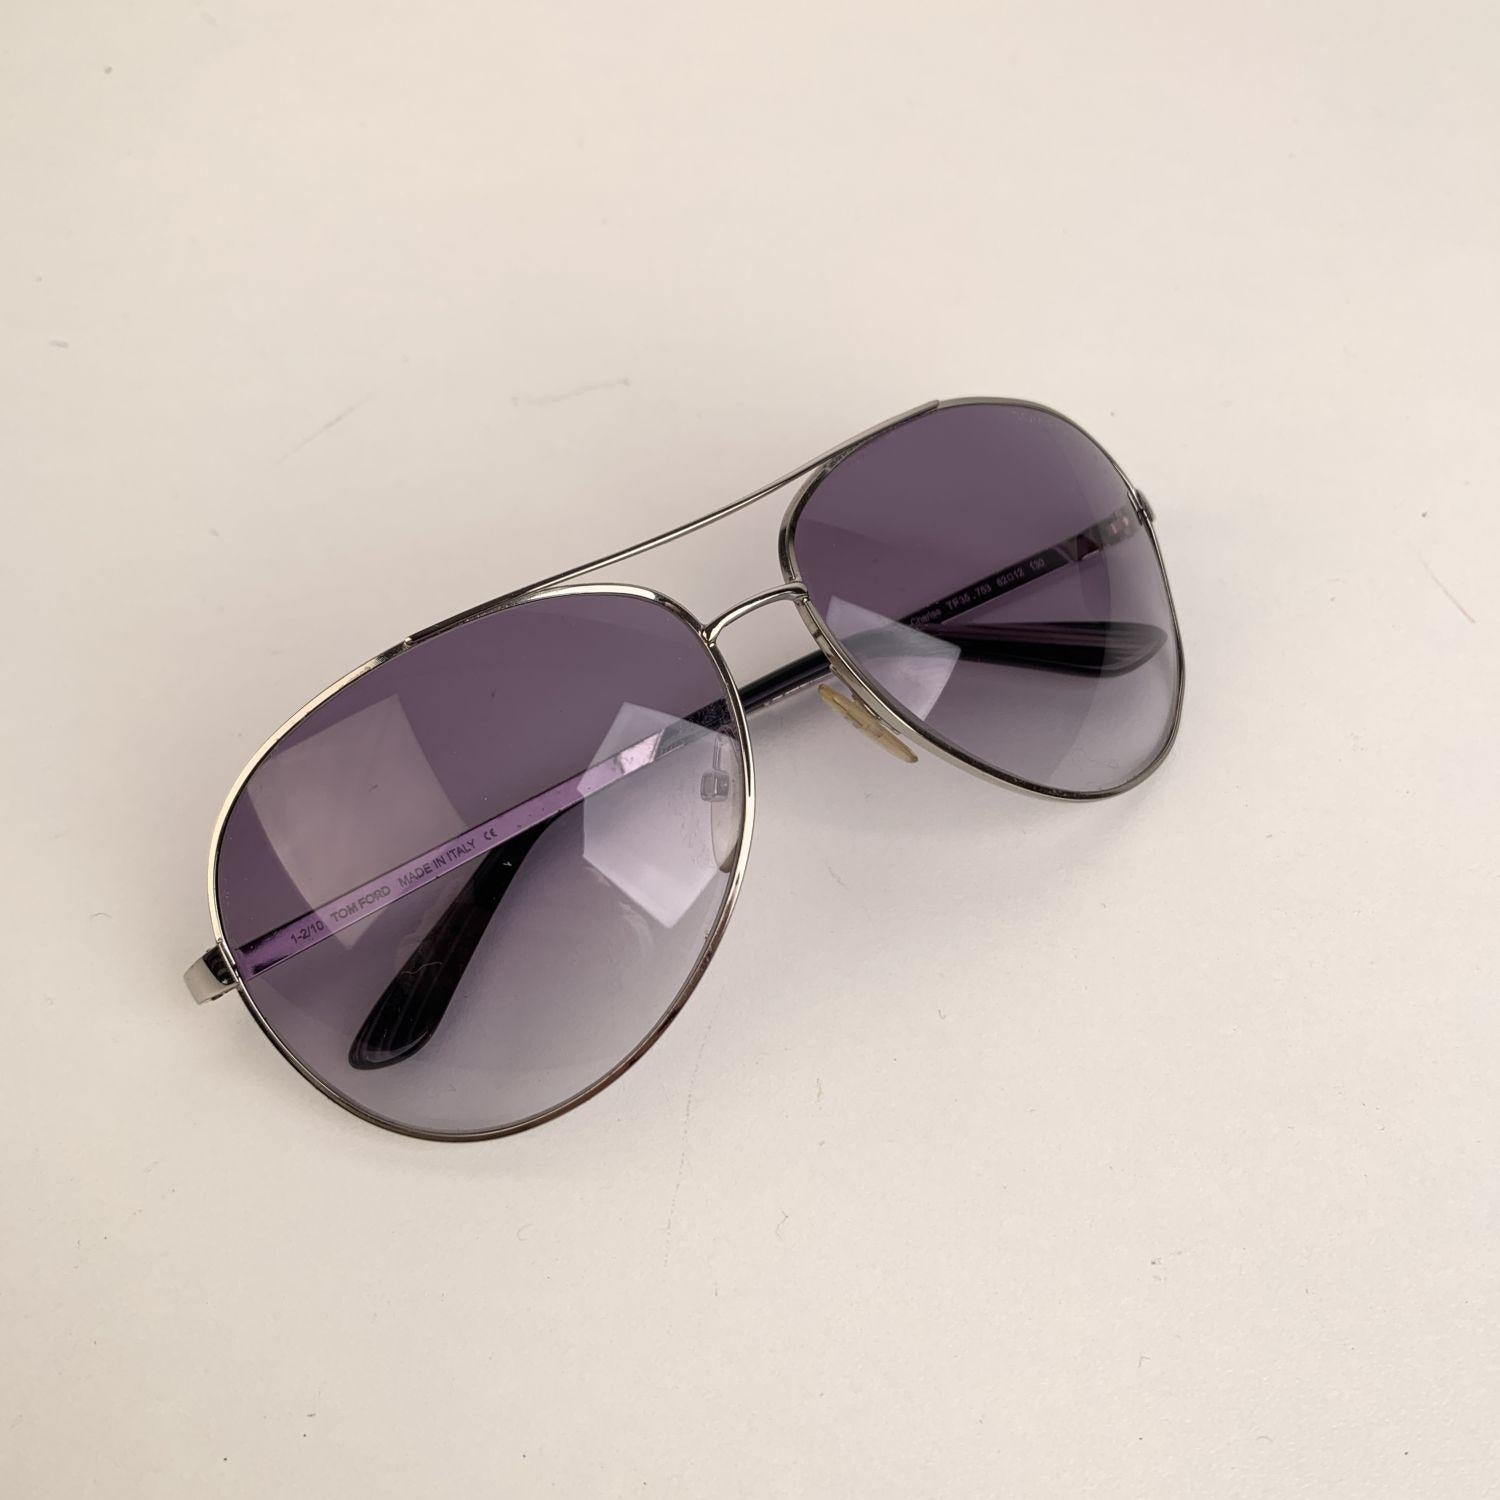 - Charles TF 35 - 753 sunglasses by Tom Ford
- Silver metal aviator frame
- Gradient 100% UV protection lenses
- Made in Italy
- Serial & ref. numbers printed internally
- OrigInal TOM FORD box and hardcase are included





Details

MATERIAL: